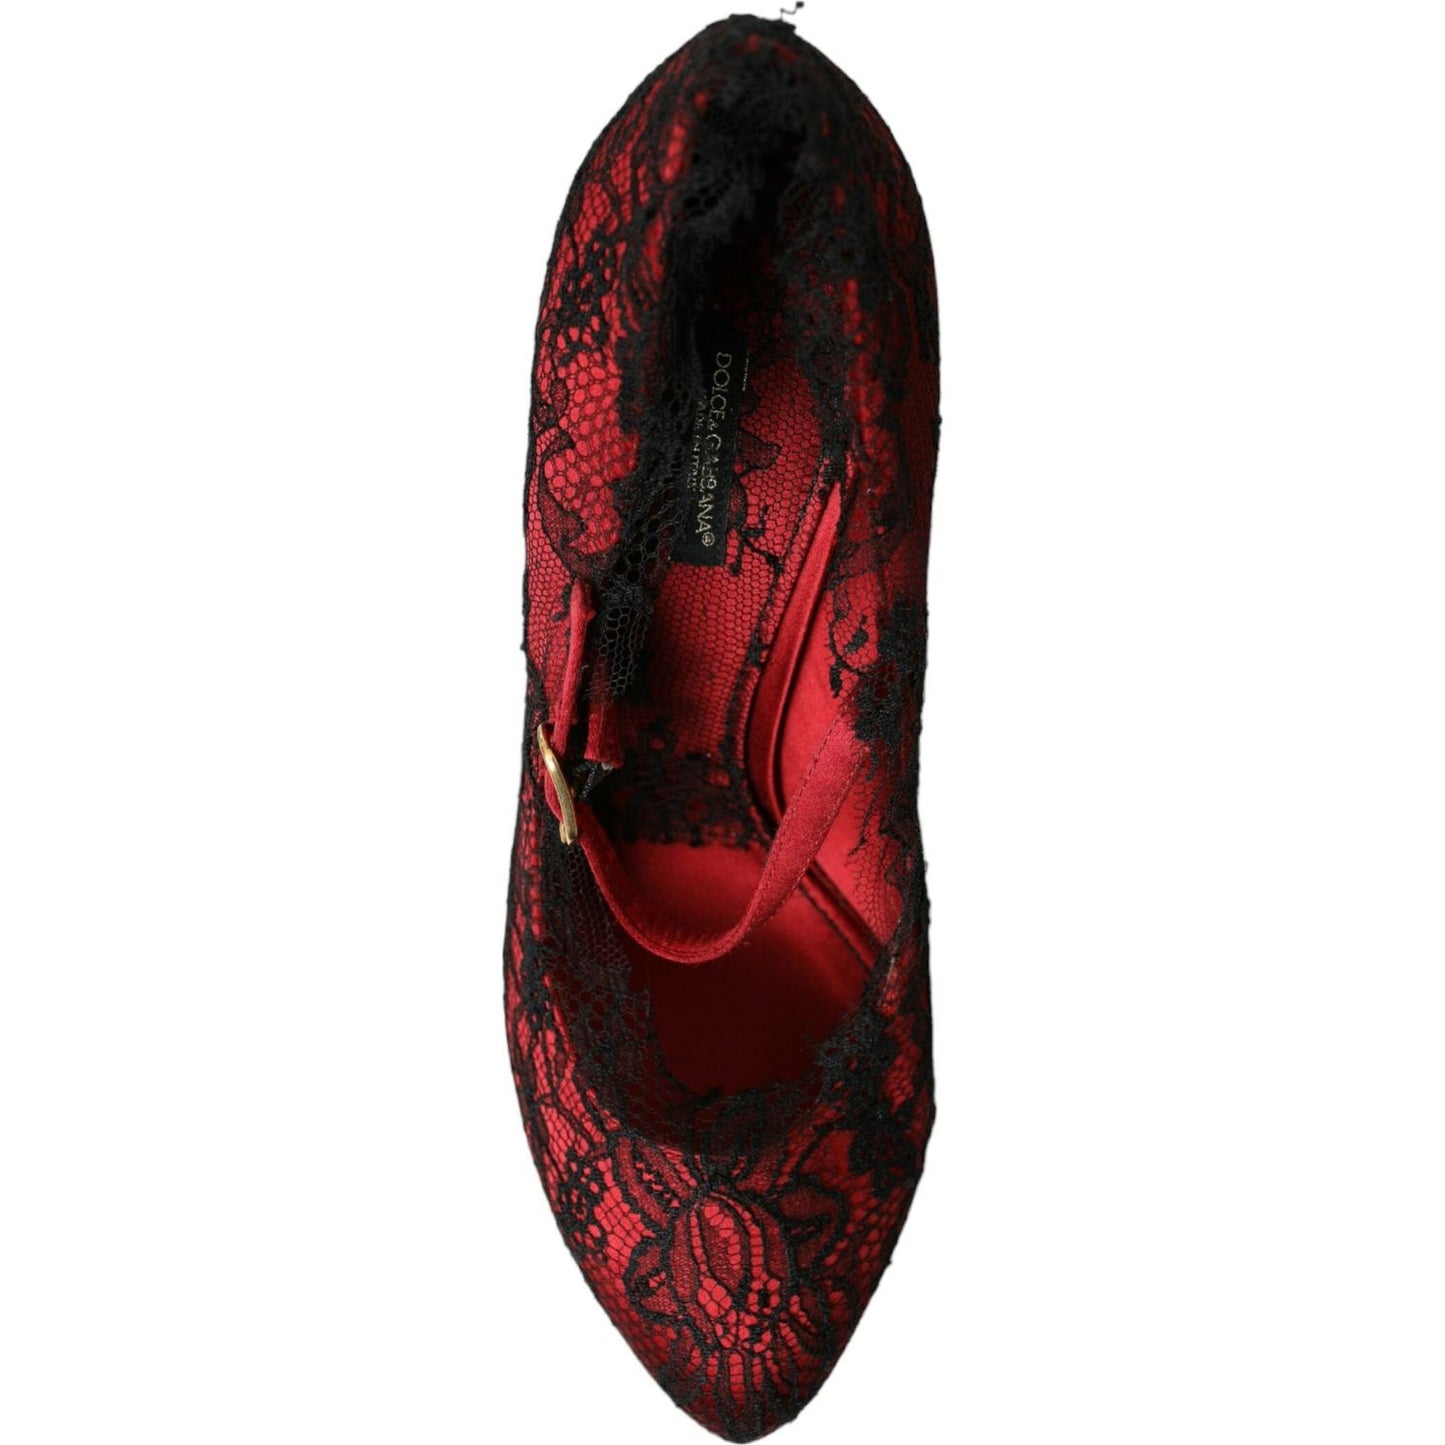 Dolce & Gabbana Red Black Floral Lace Mary Jane Pumps Shoes red-black-floral-lace-mary-jane-pumps-shoes